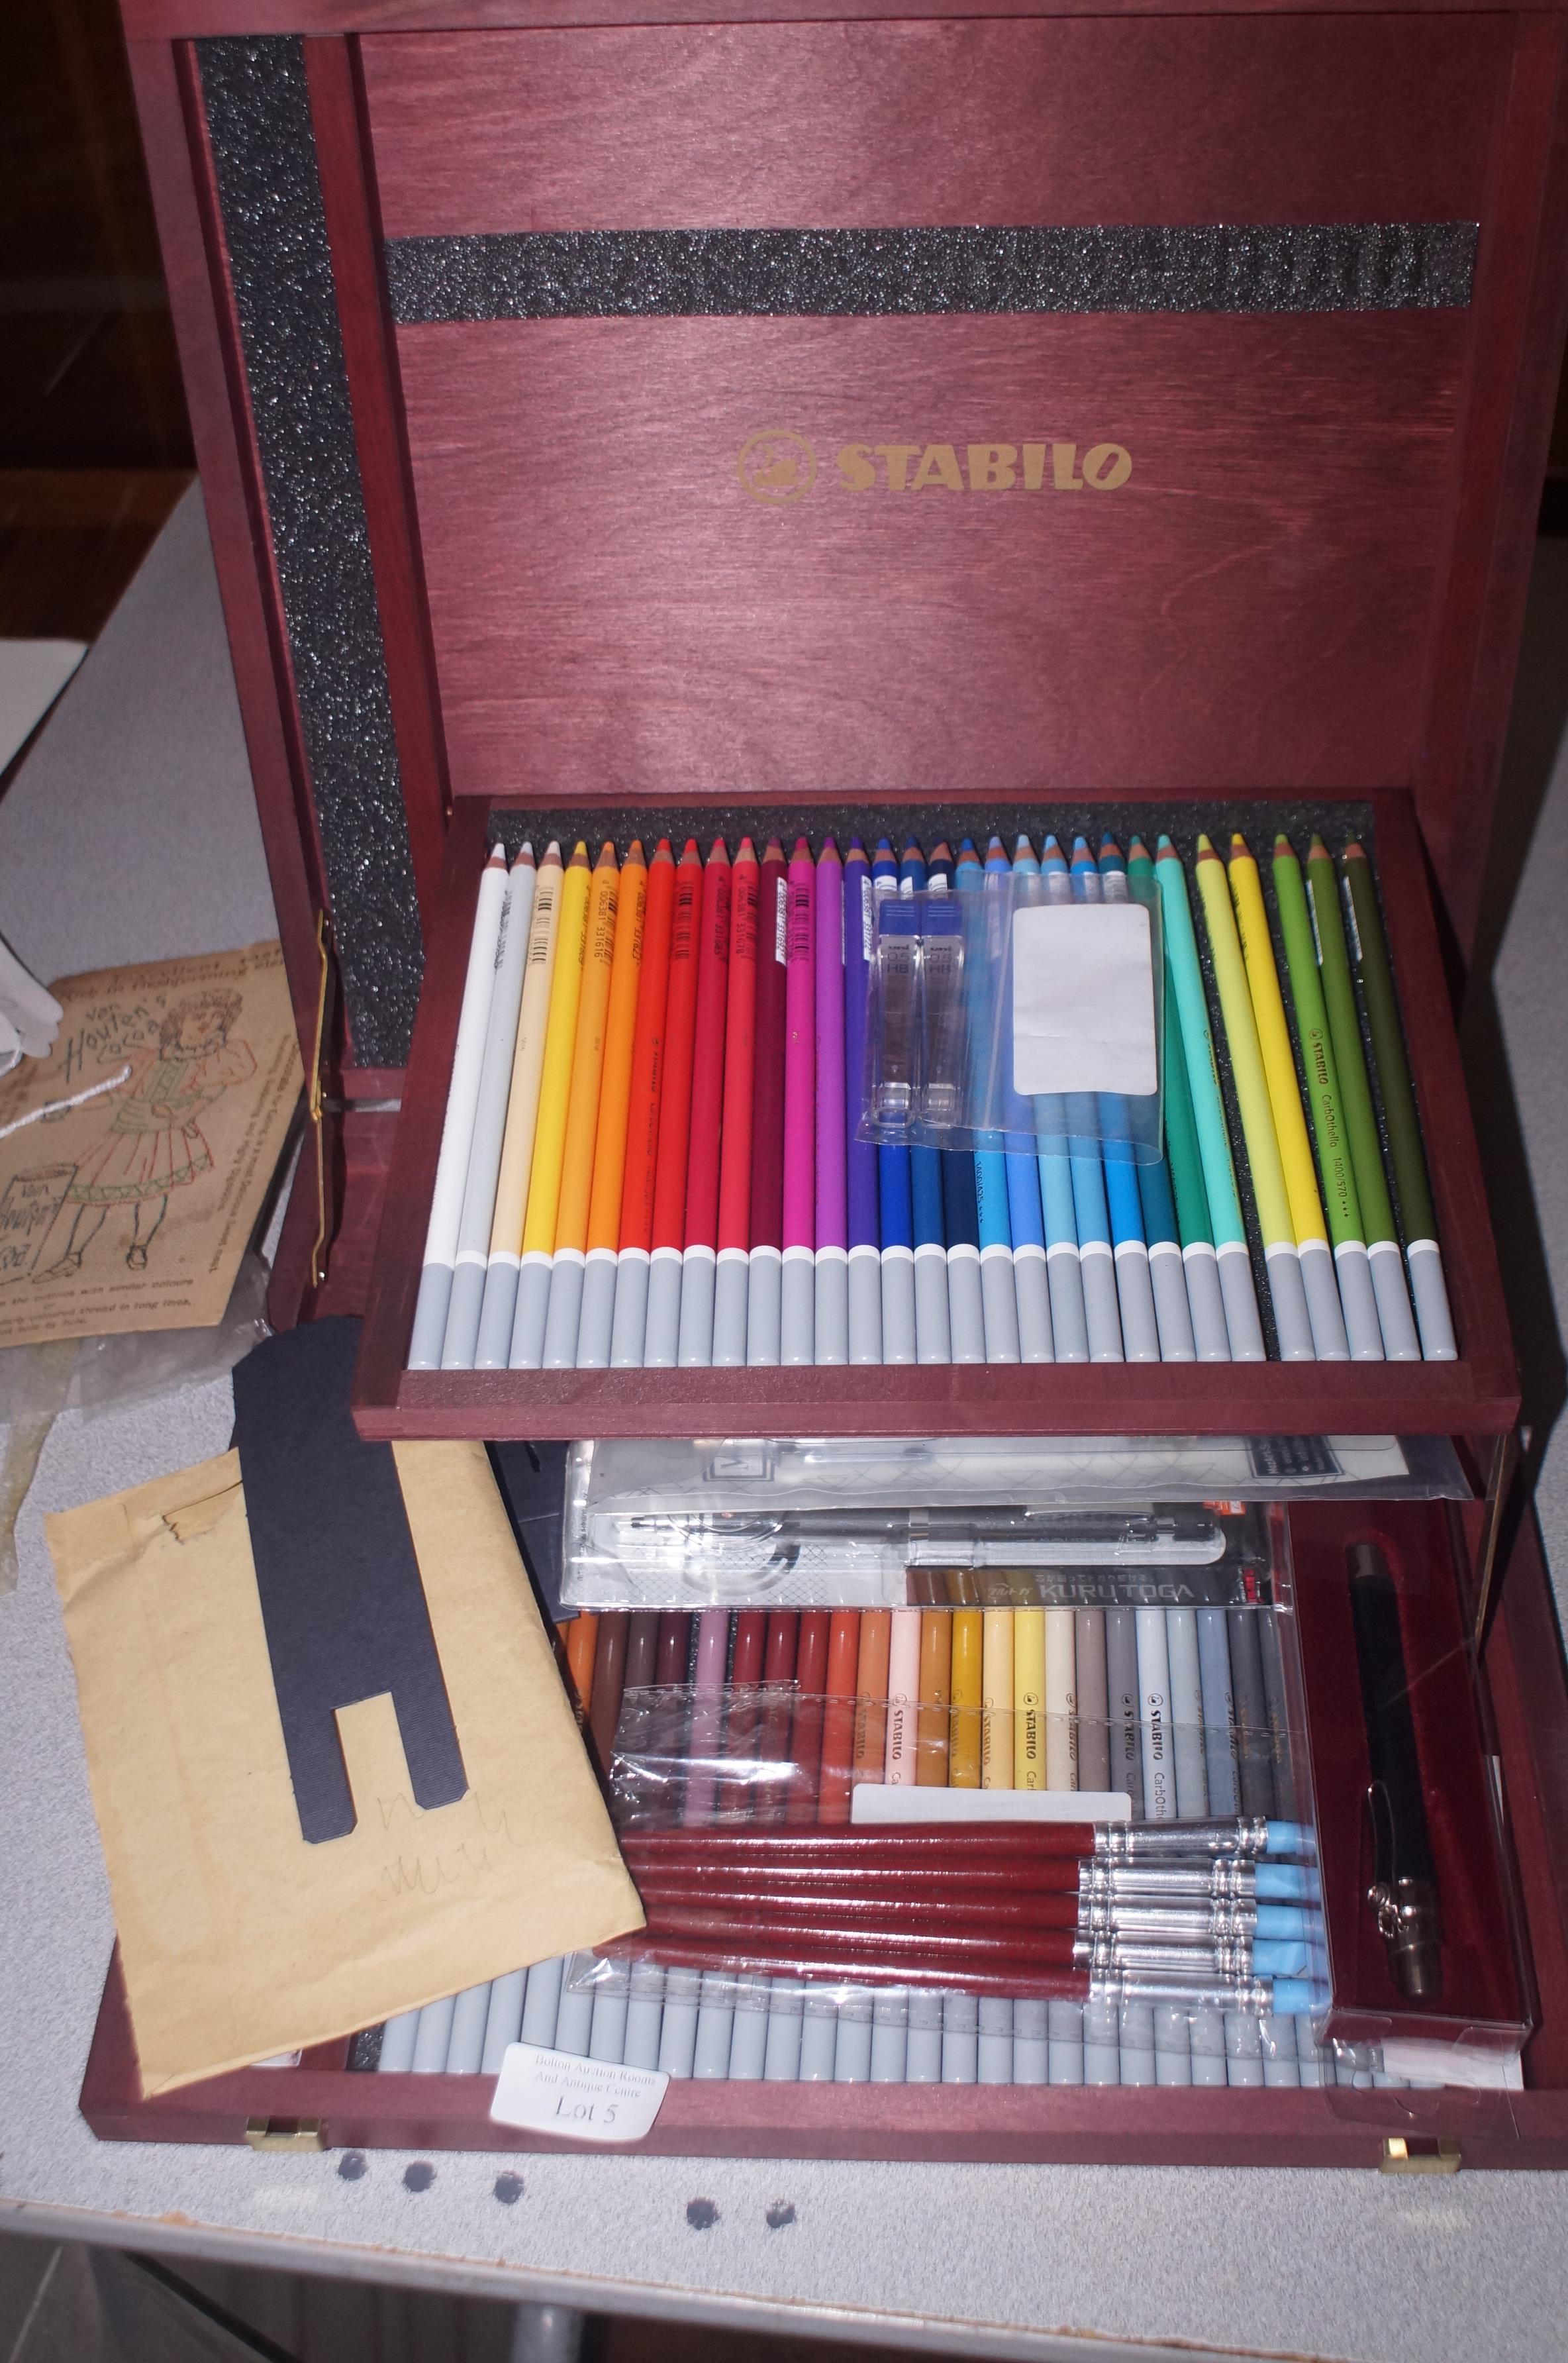 Stabilo pencil and drawing set